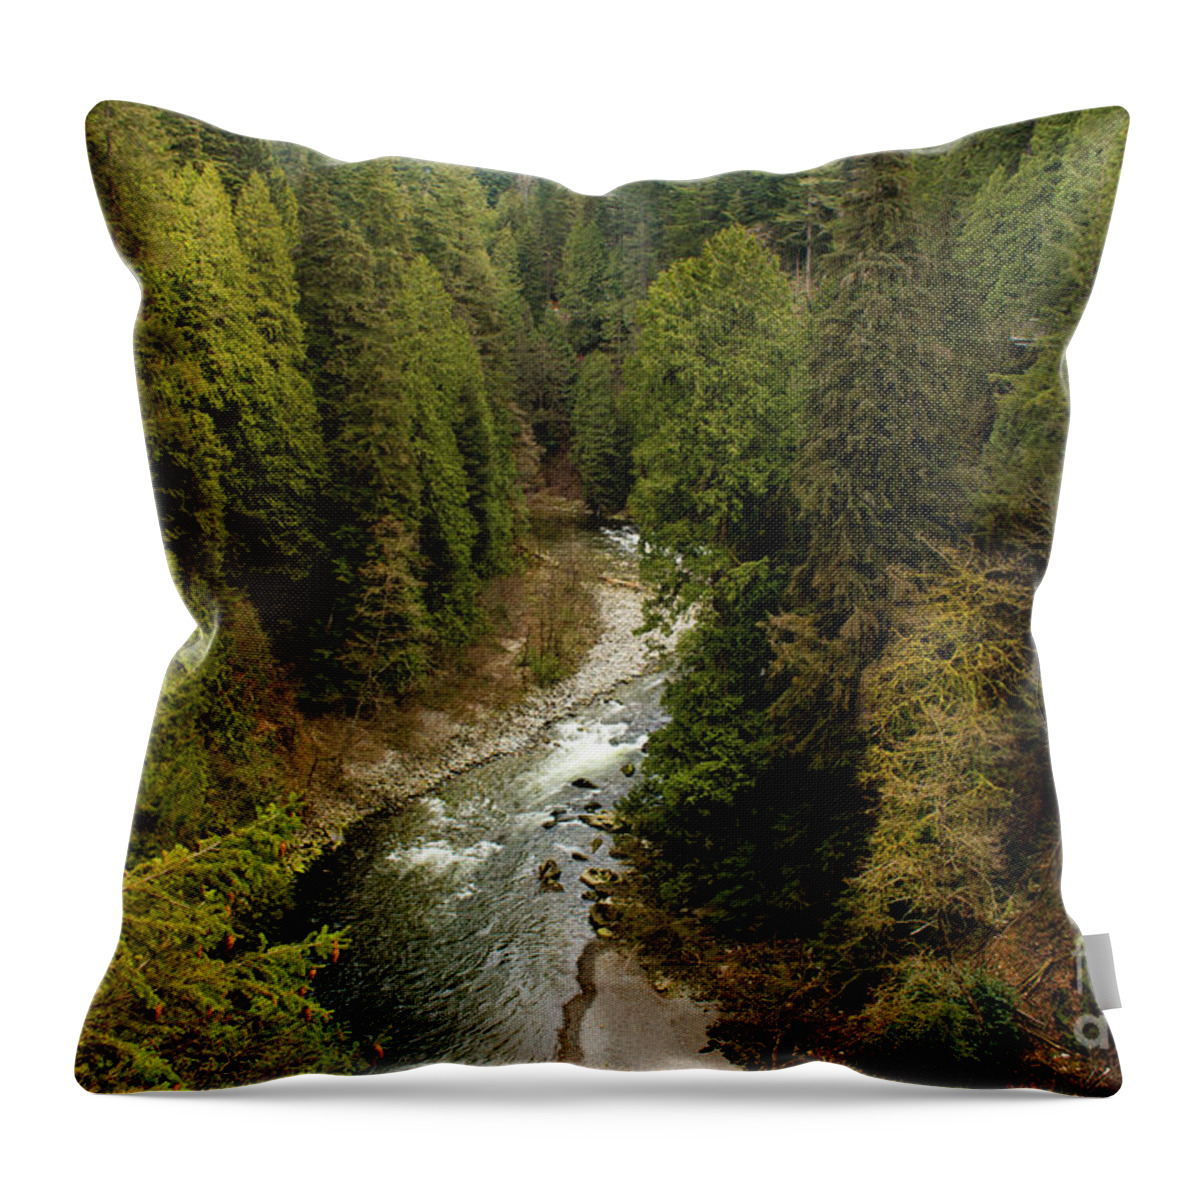 Capilano River Throw Pillow featuring the photograph Capilano River by Ivete Basso Photography